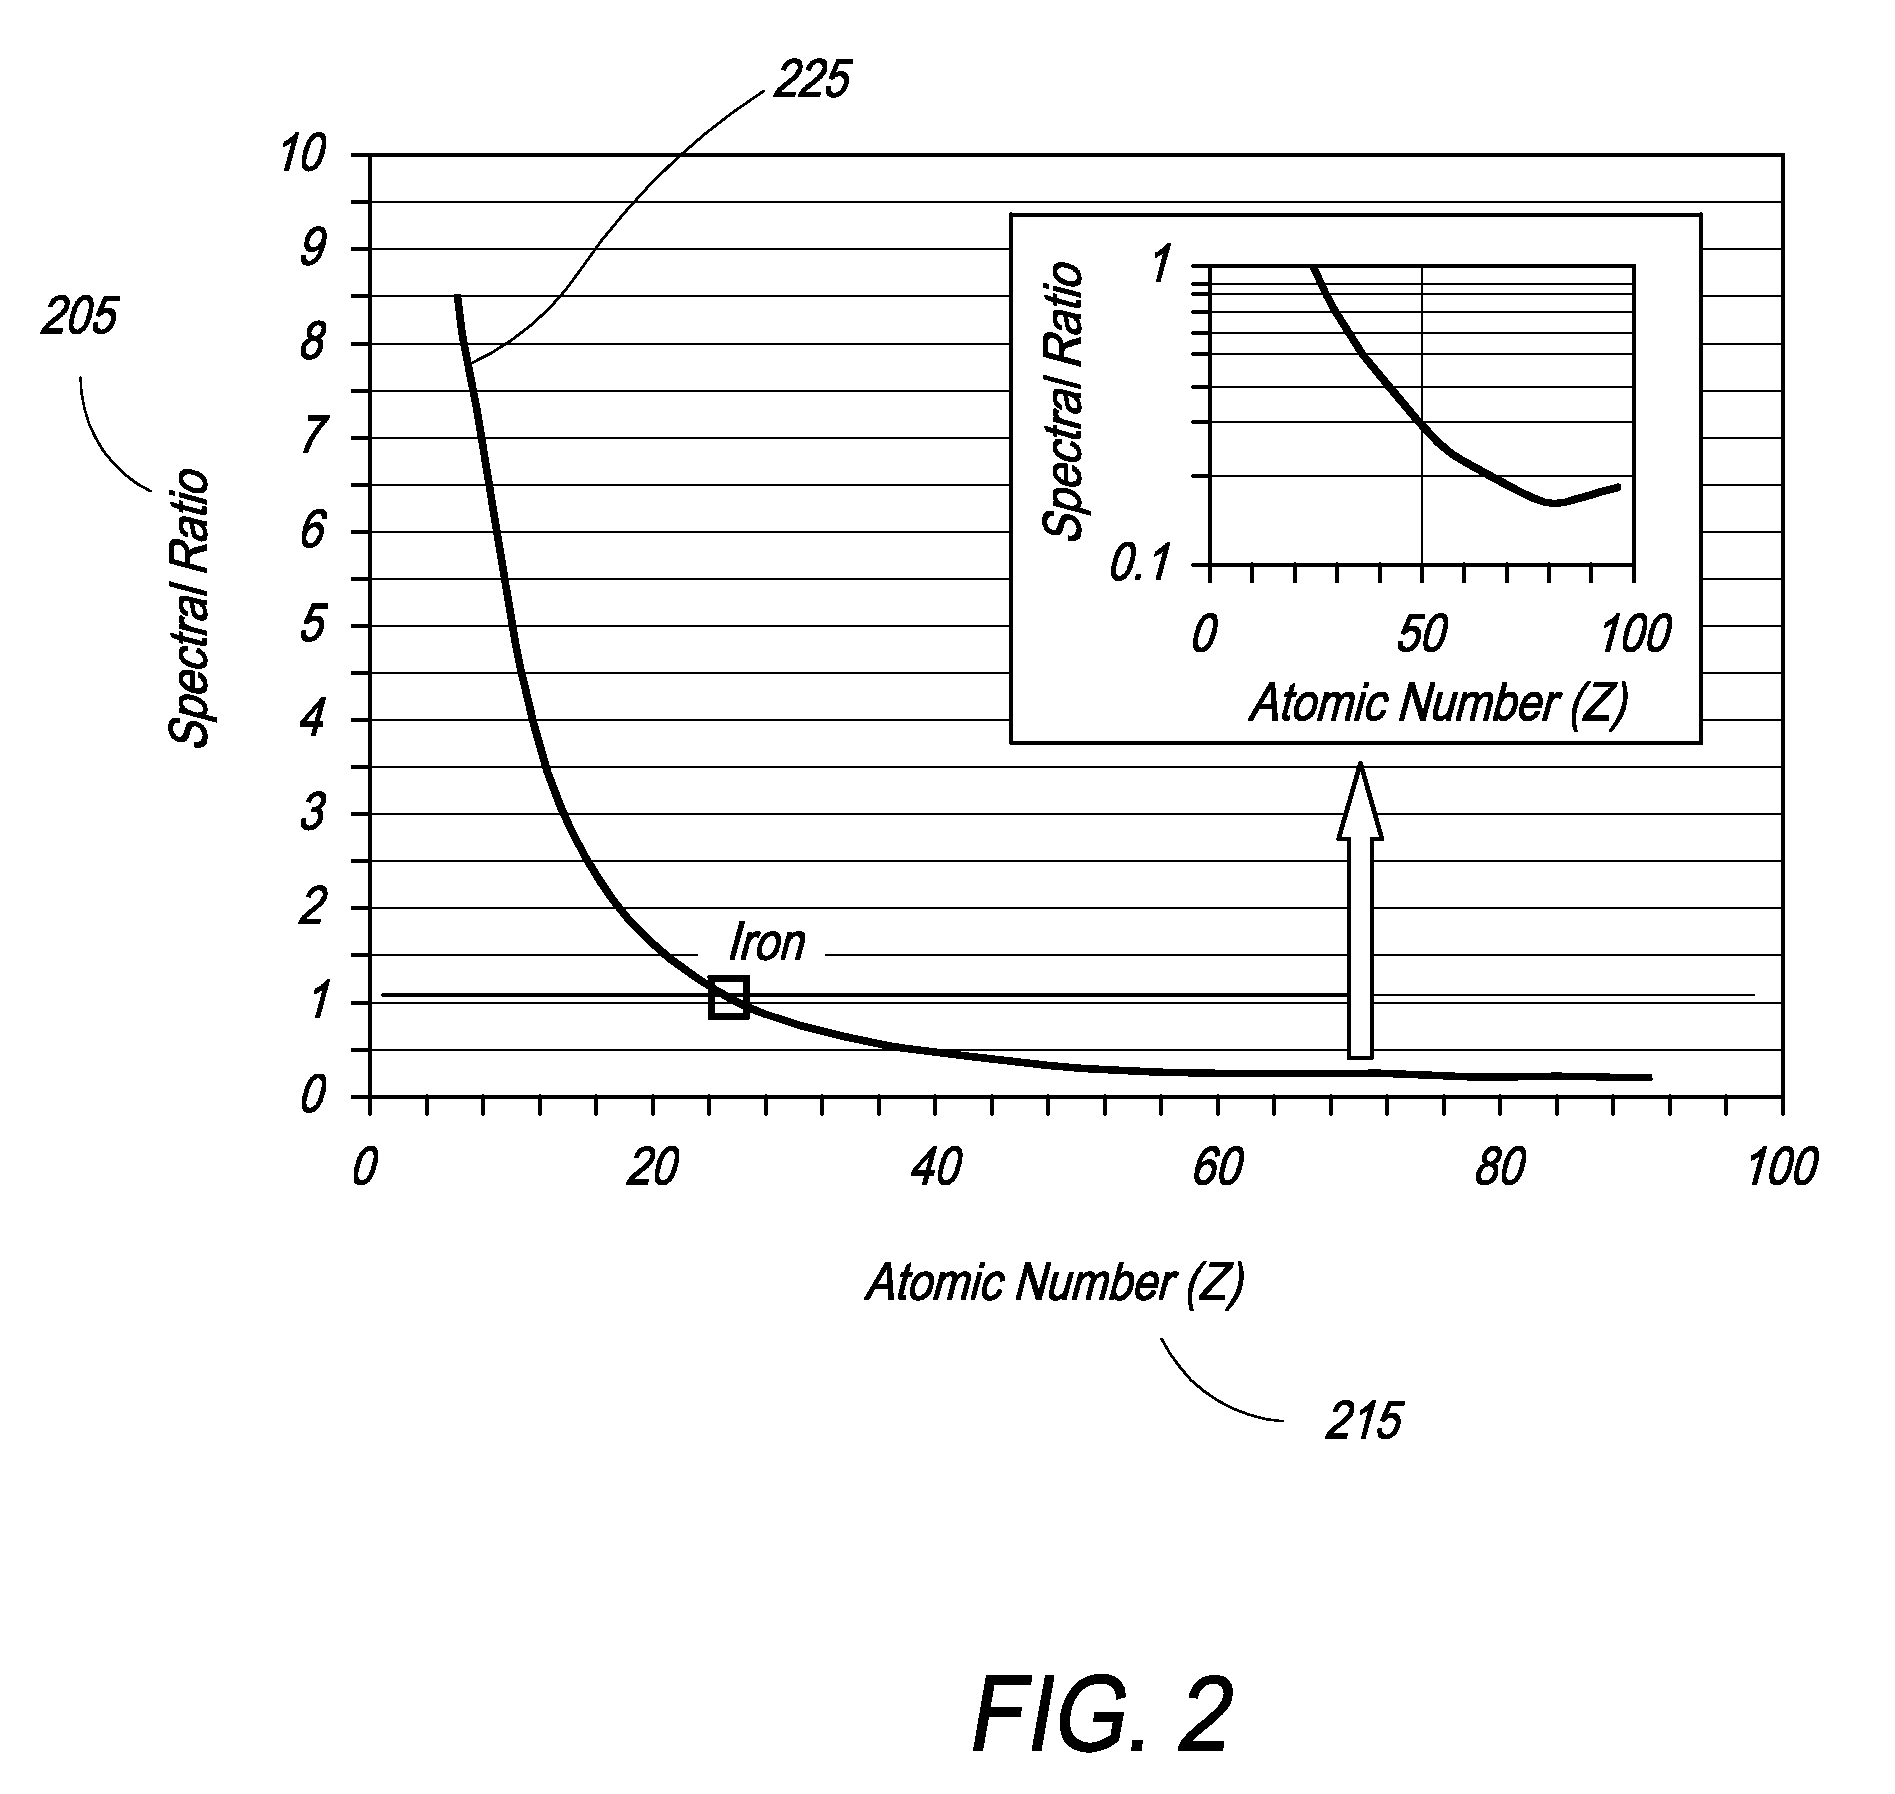 High-energy X-ray-spectroscopy-based inspection system and methods to determine the atomic number of materials